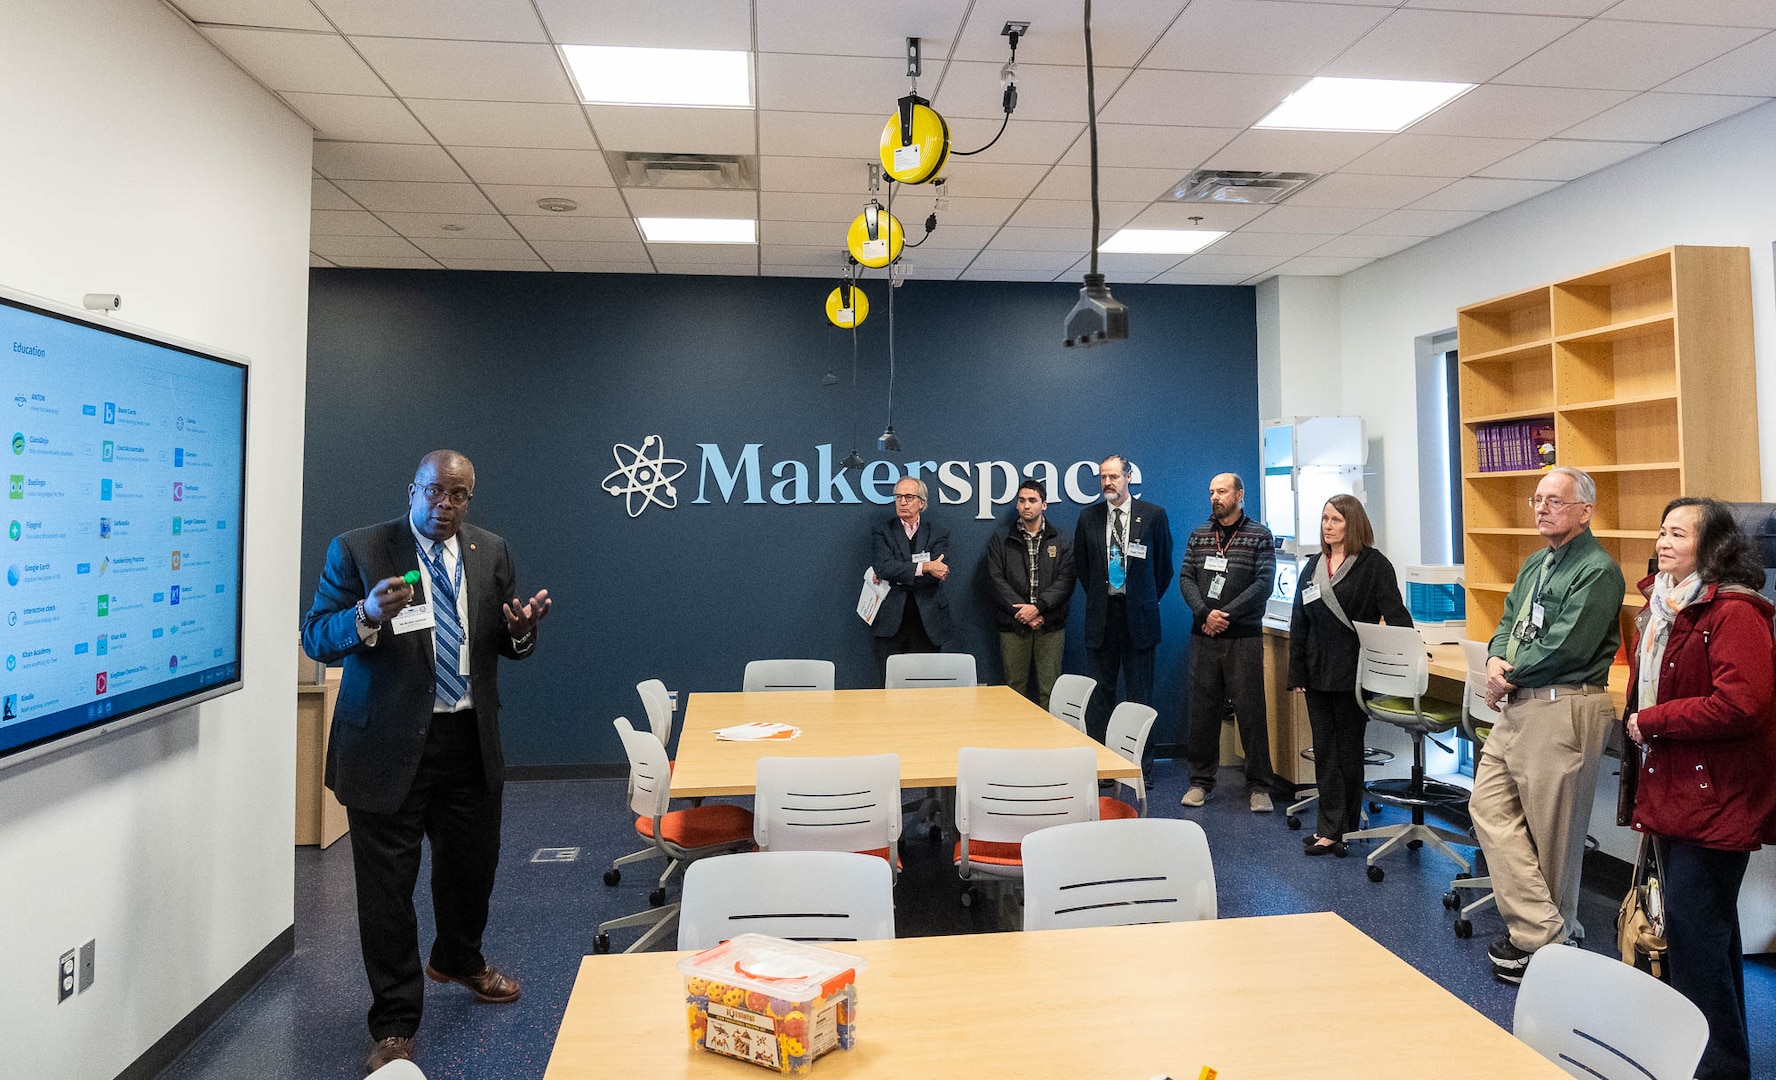 IMAGE: On Dec. 12 at the Potomac Tech Bridge kickoff event, University of Mary Washington Dahlgren Campus Executive Director Dr. Michael Hubbard provided a tour of the campus’ Makerspace that will serve as the physical location of the tech bridge.